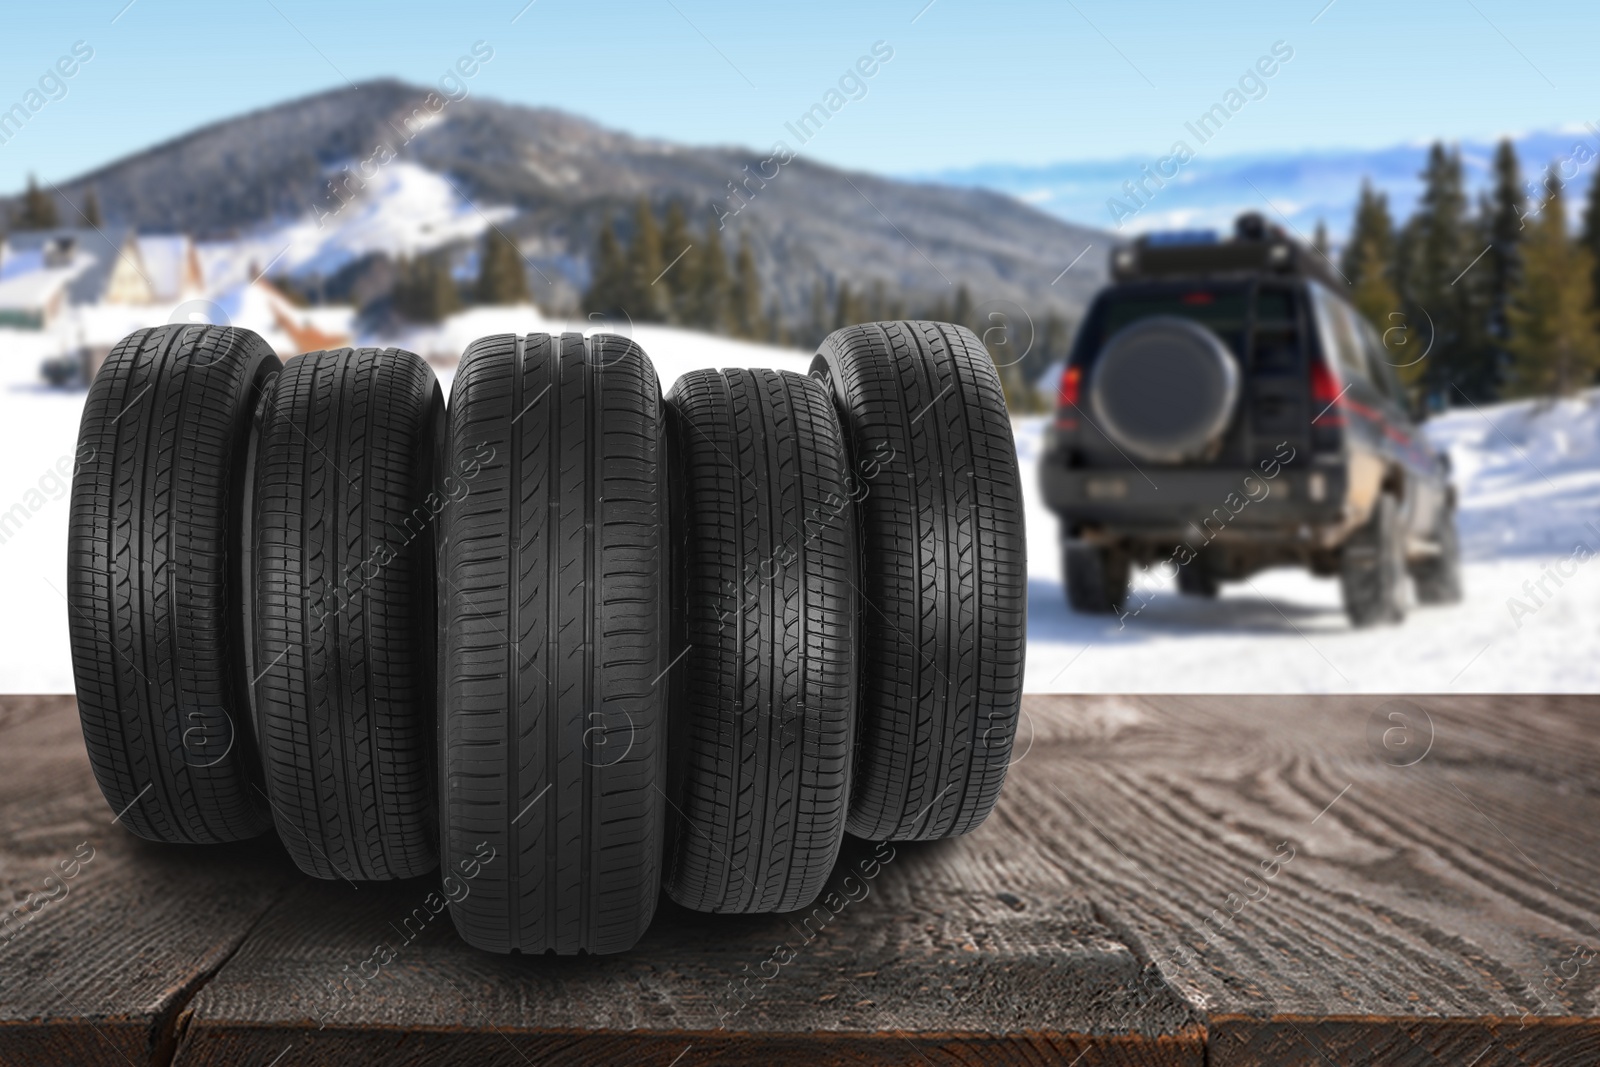 Image of Snow tires on wooden surface and winter landscape with car